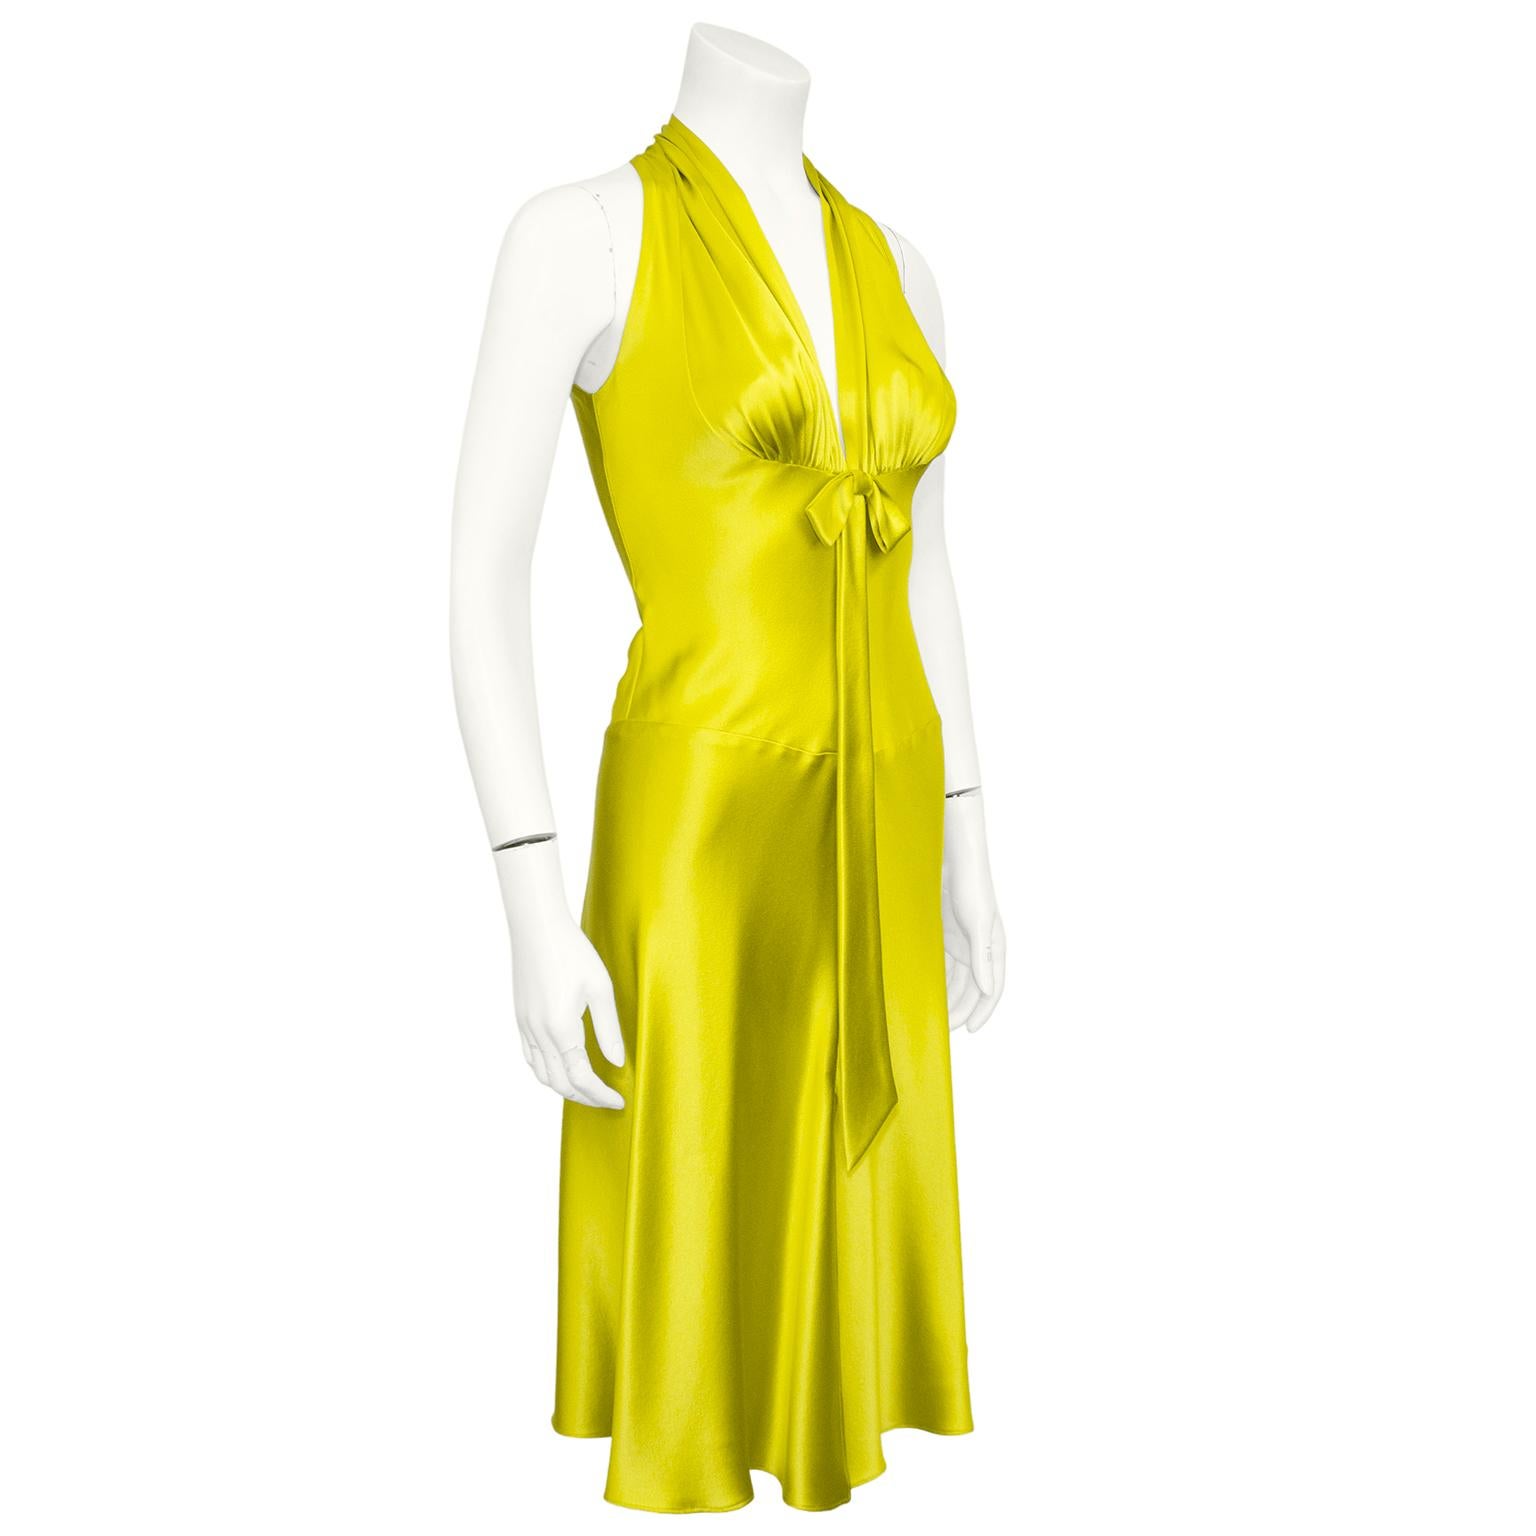 Stunning & sexy silk chartreuse satin dress from the 1990s. Deep v neckline with rounded ruching at bust and bow detail. The silk skims the body with a drop waist and flows into a mid length skirt. Small slit at centre front seam that adds movement